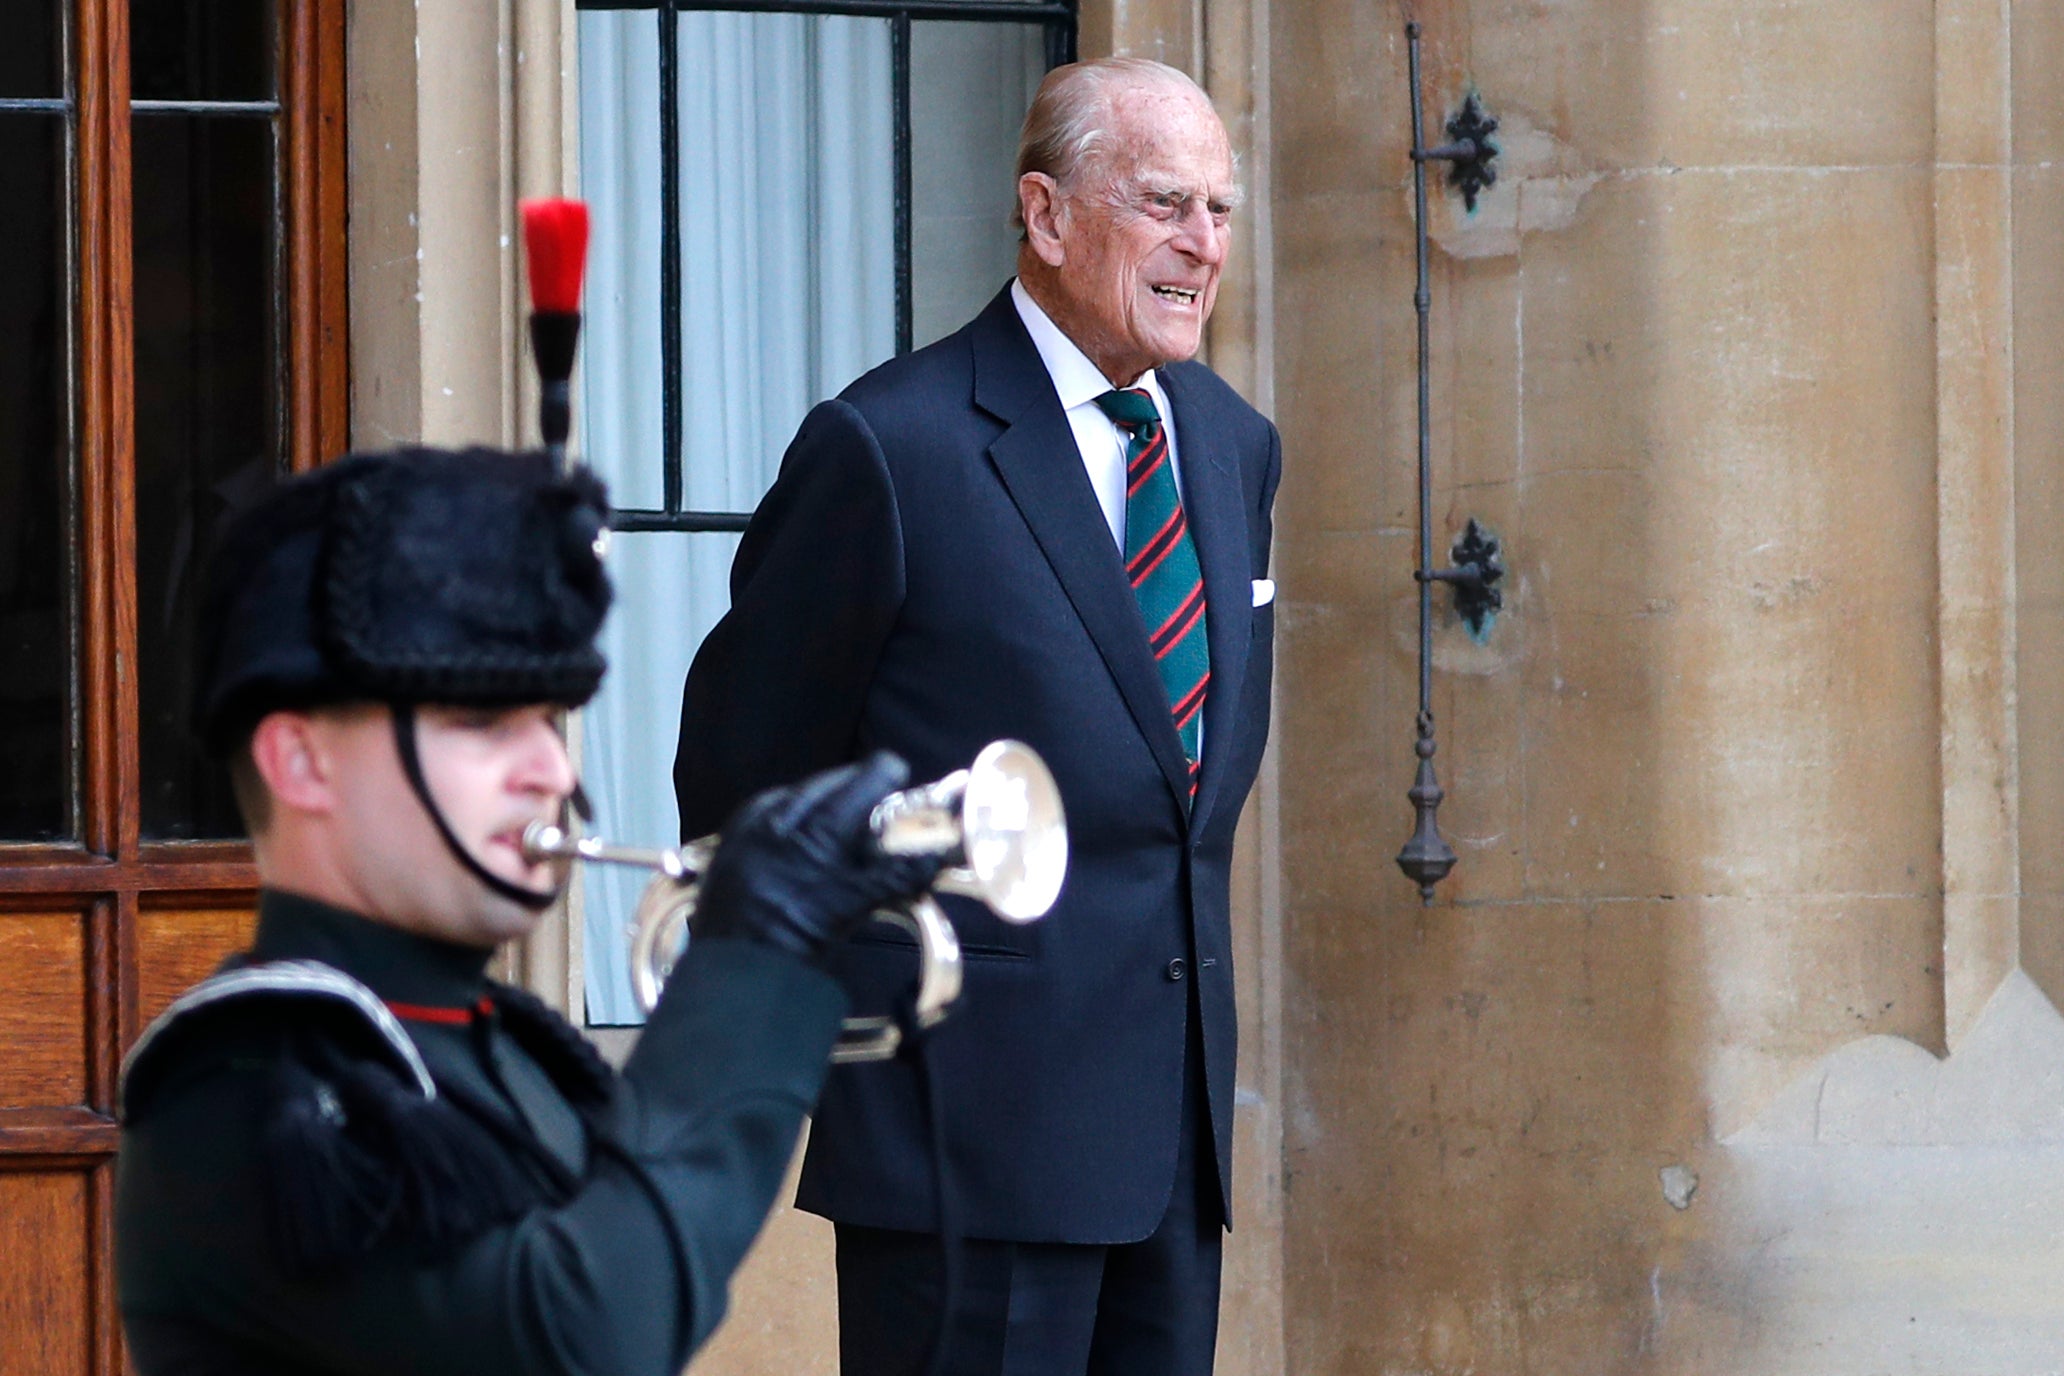 Prince Philip was first admitted to hospital last month with an infection